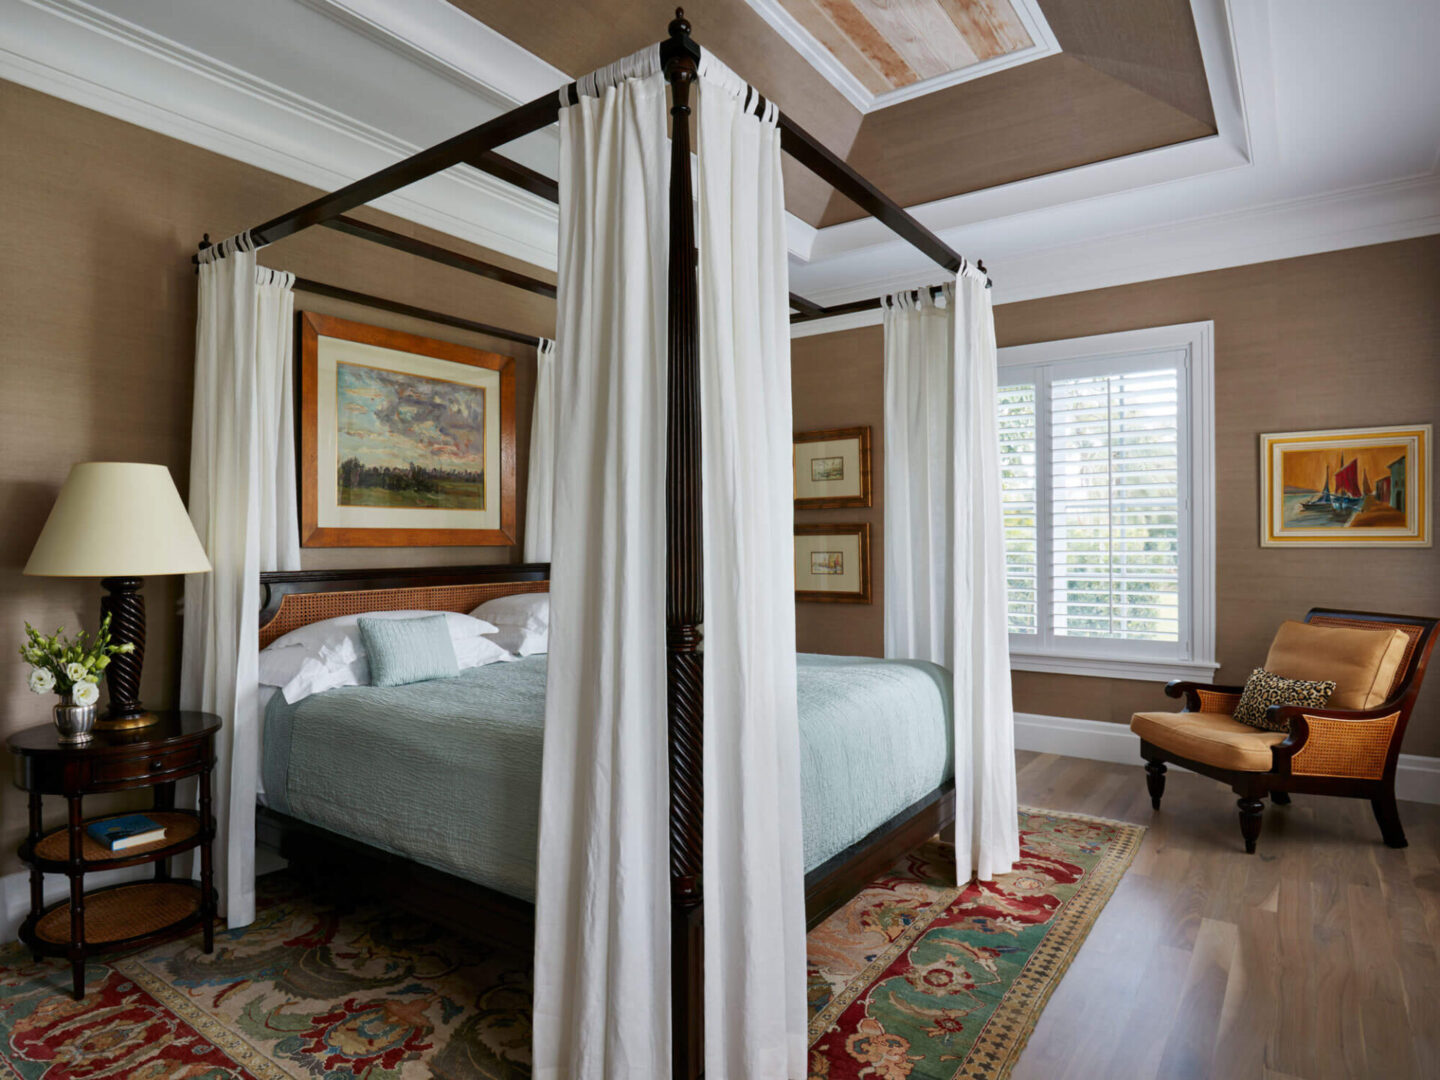 A bed room with a four poster bed and a window